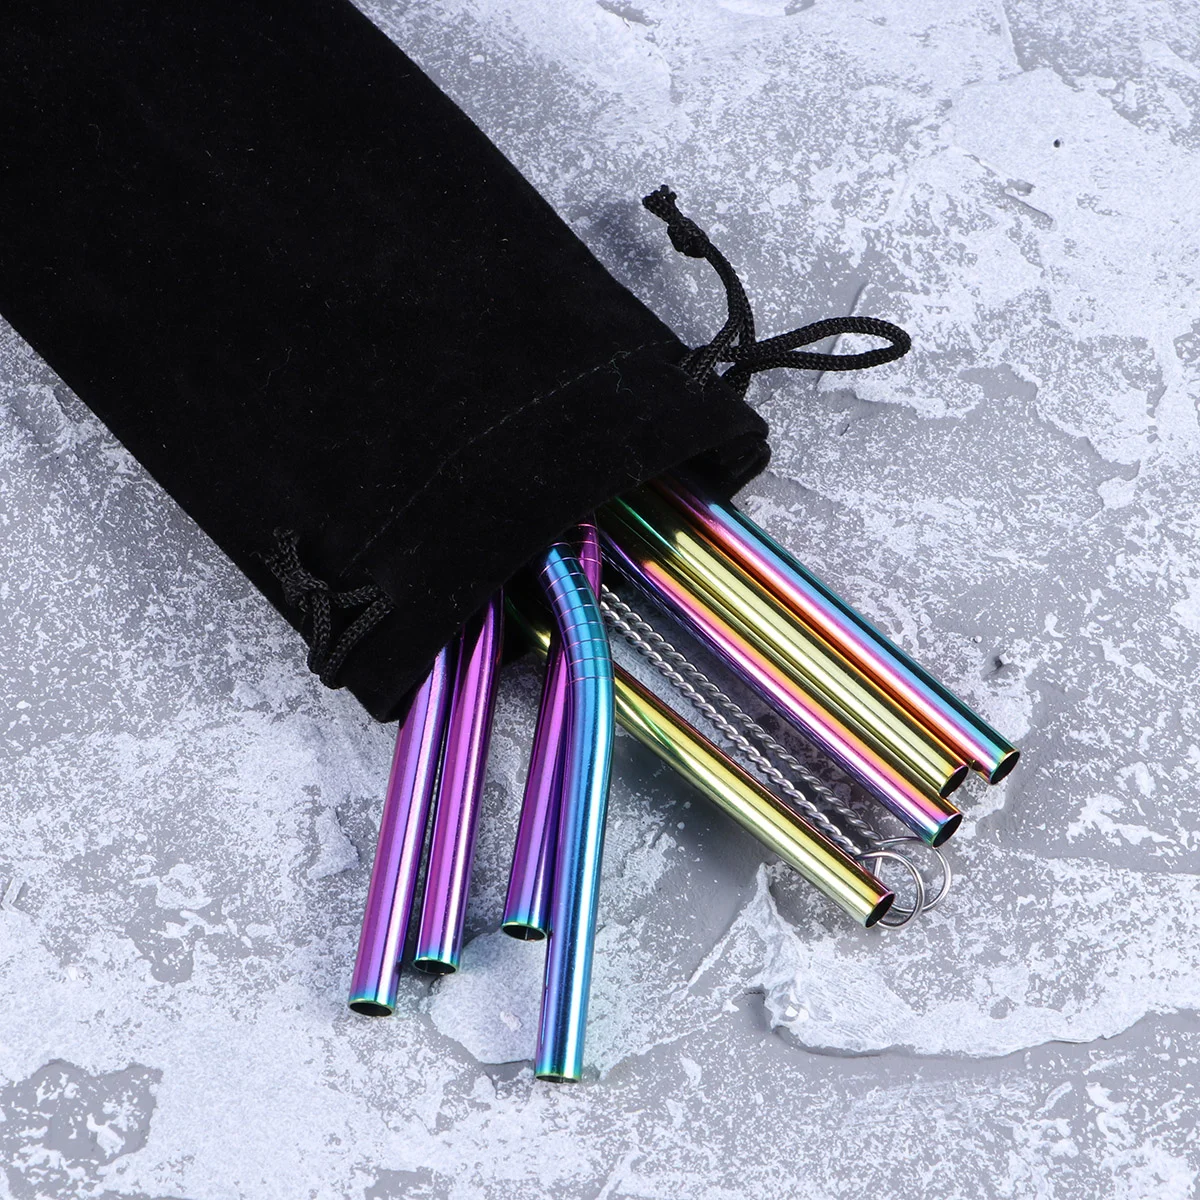 

8pcs Stainless Steel Drinking Metal Straws Rainbow Multi-Colored Straw Reusable Drink Straw for Tumblers Rumblers Beverage